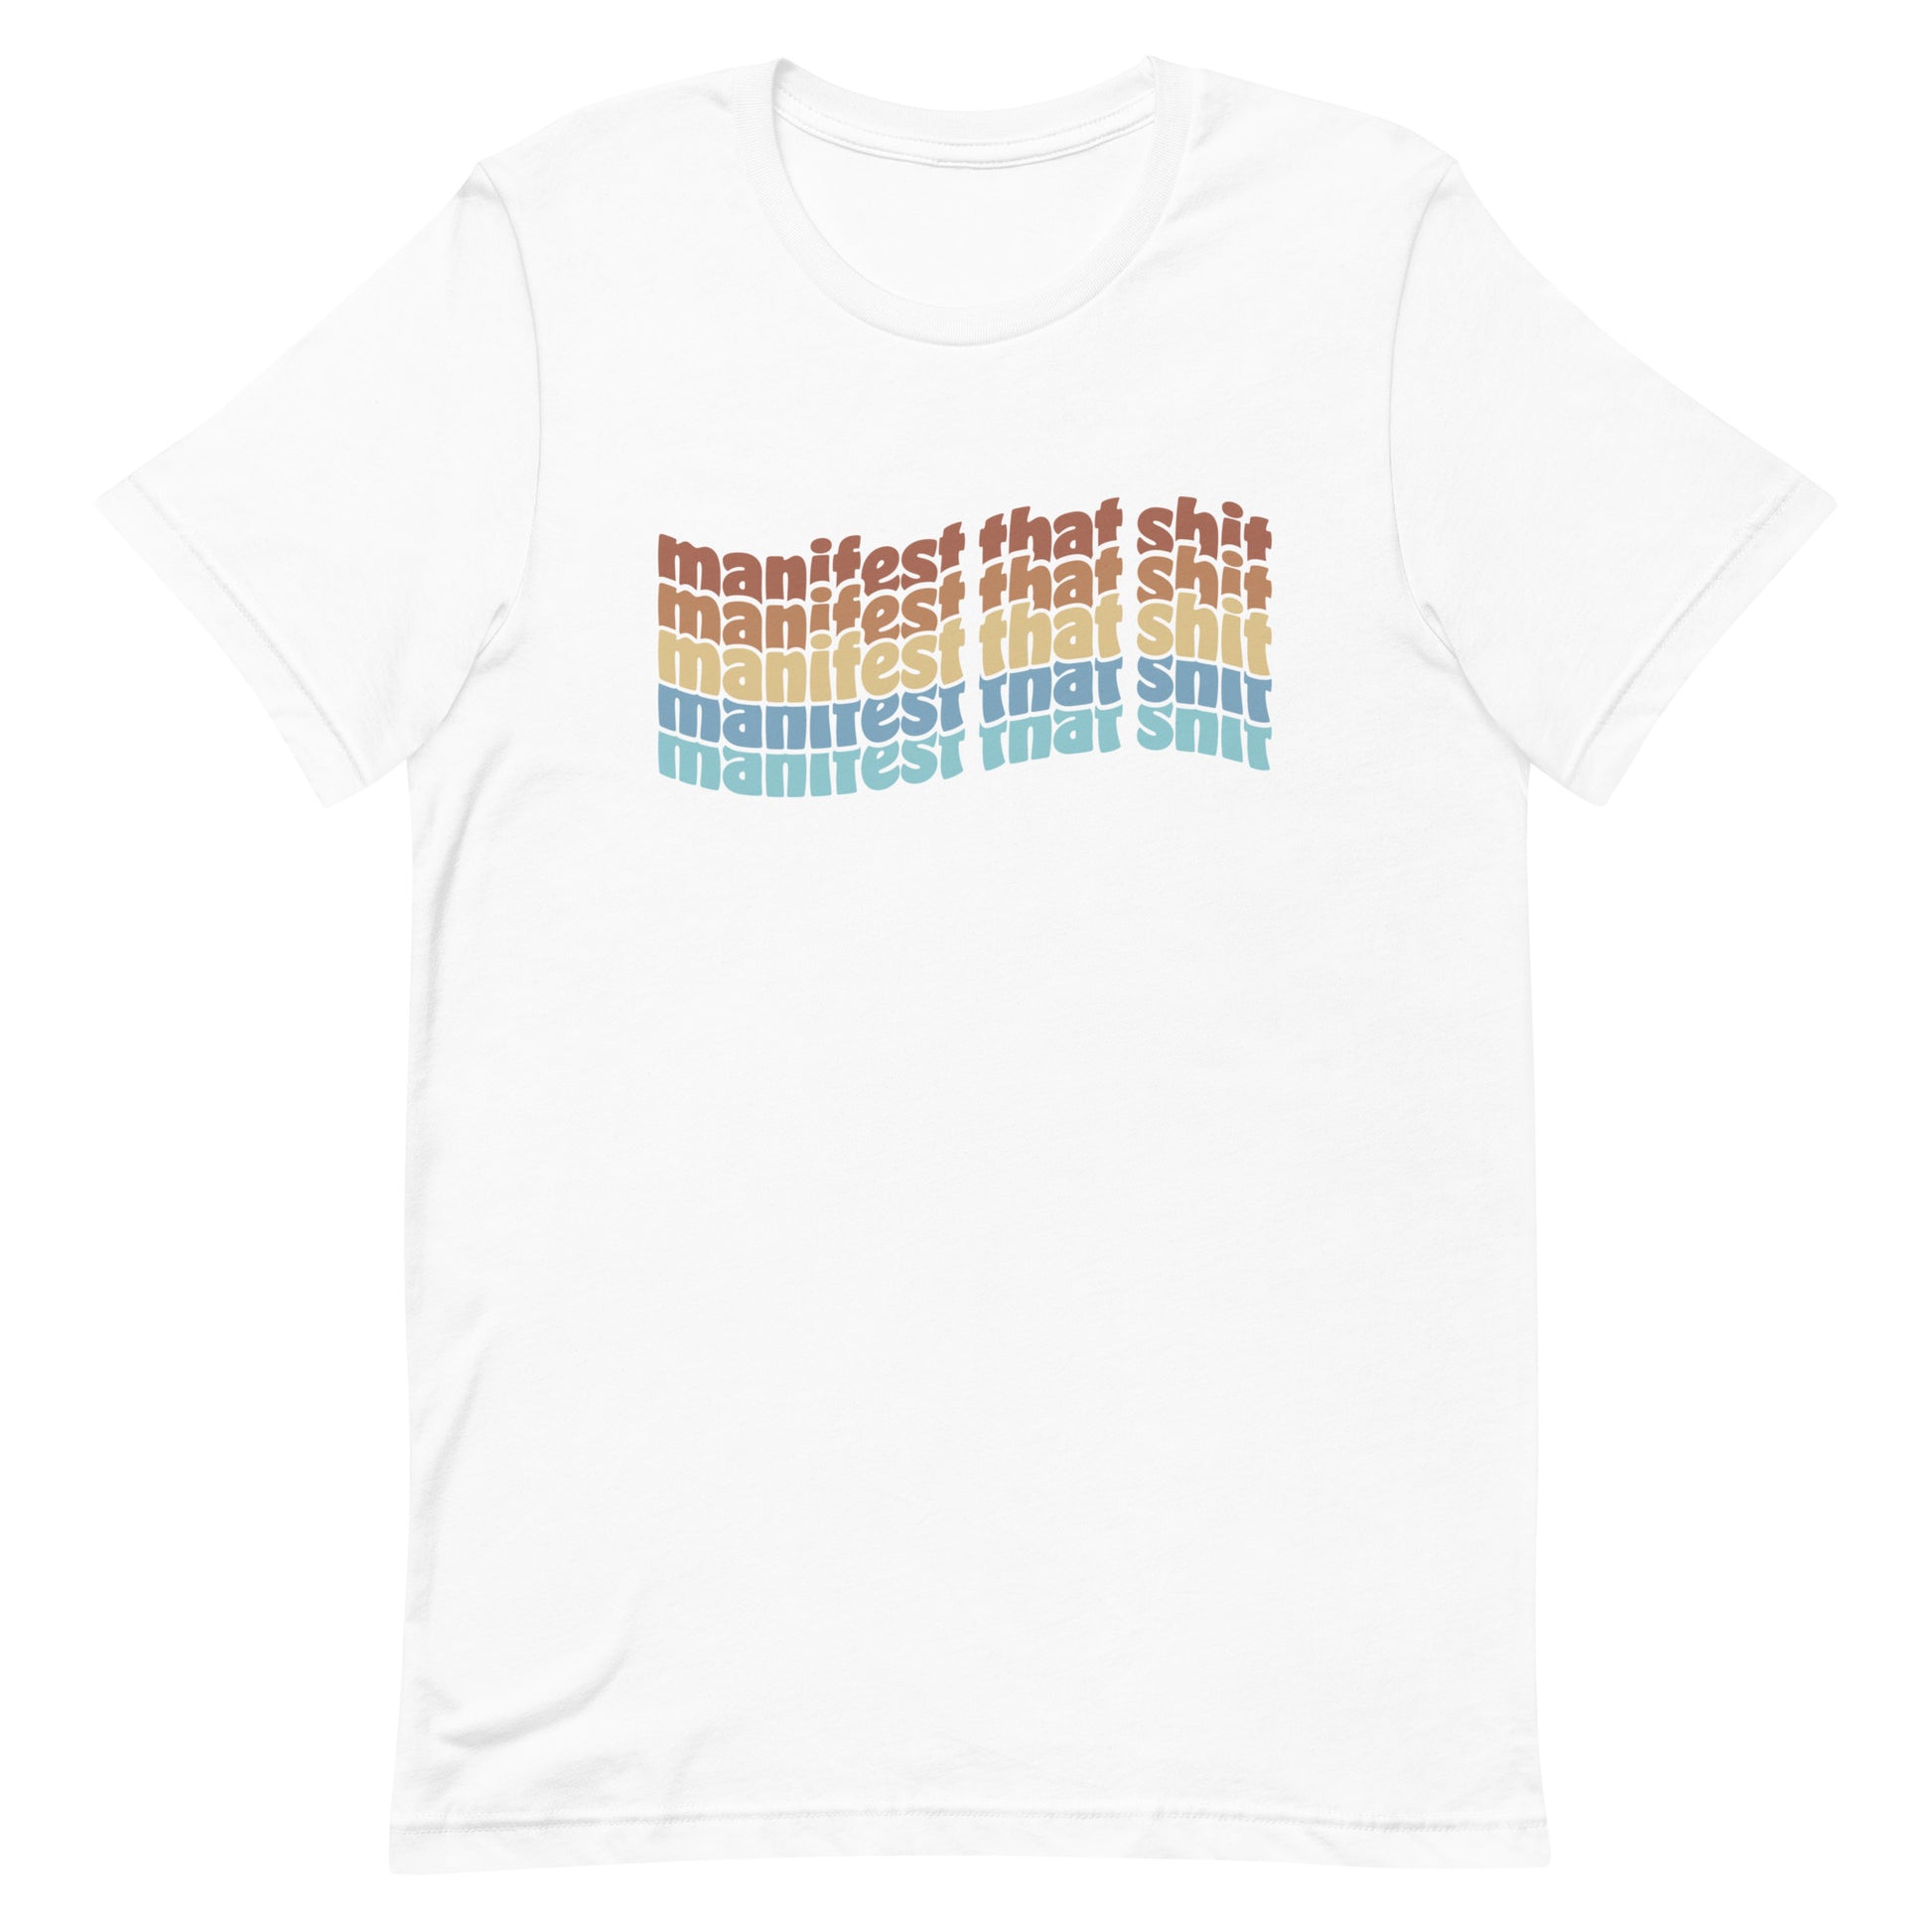 A white crewneck t-shirt featuring stacked text that reads "manifest that shit" in a rainbow of colors.